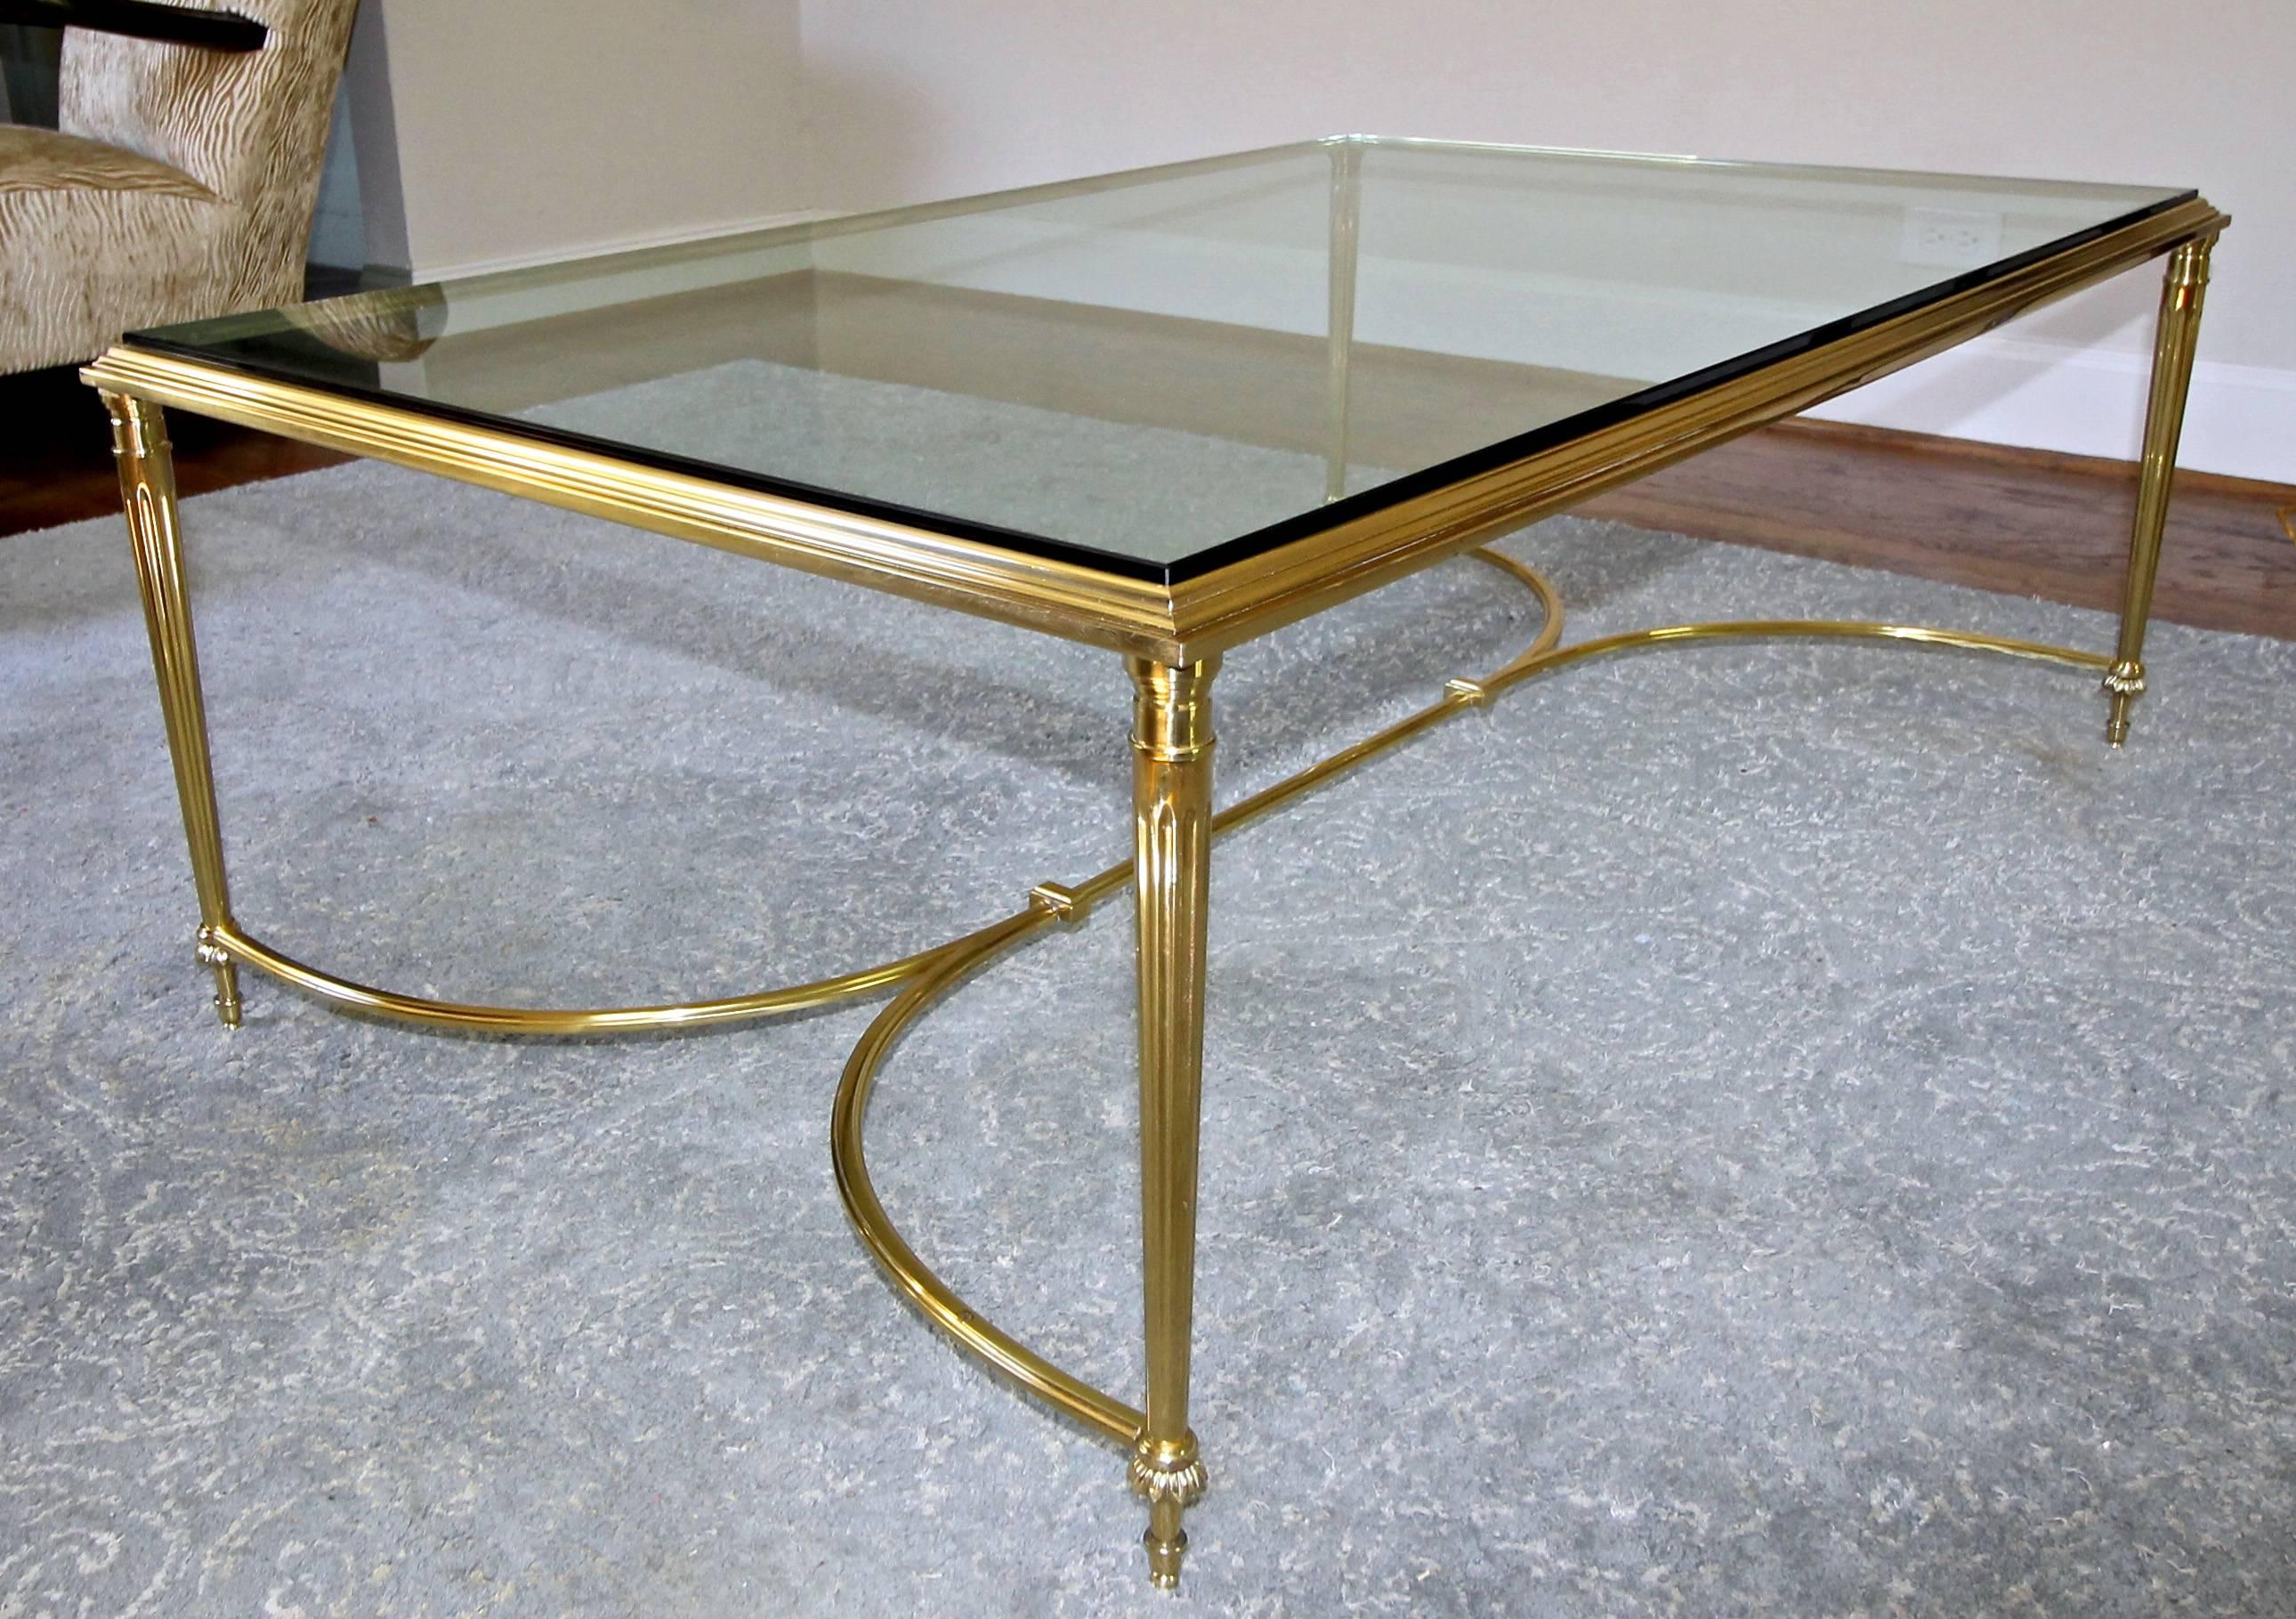 Neoclassical Large French Louis XVI Neoclassic Style Solid Brass Coffee or Cocktail Table